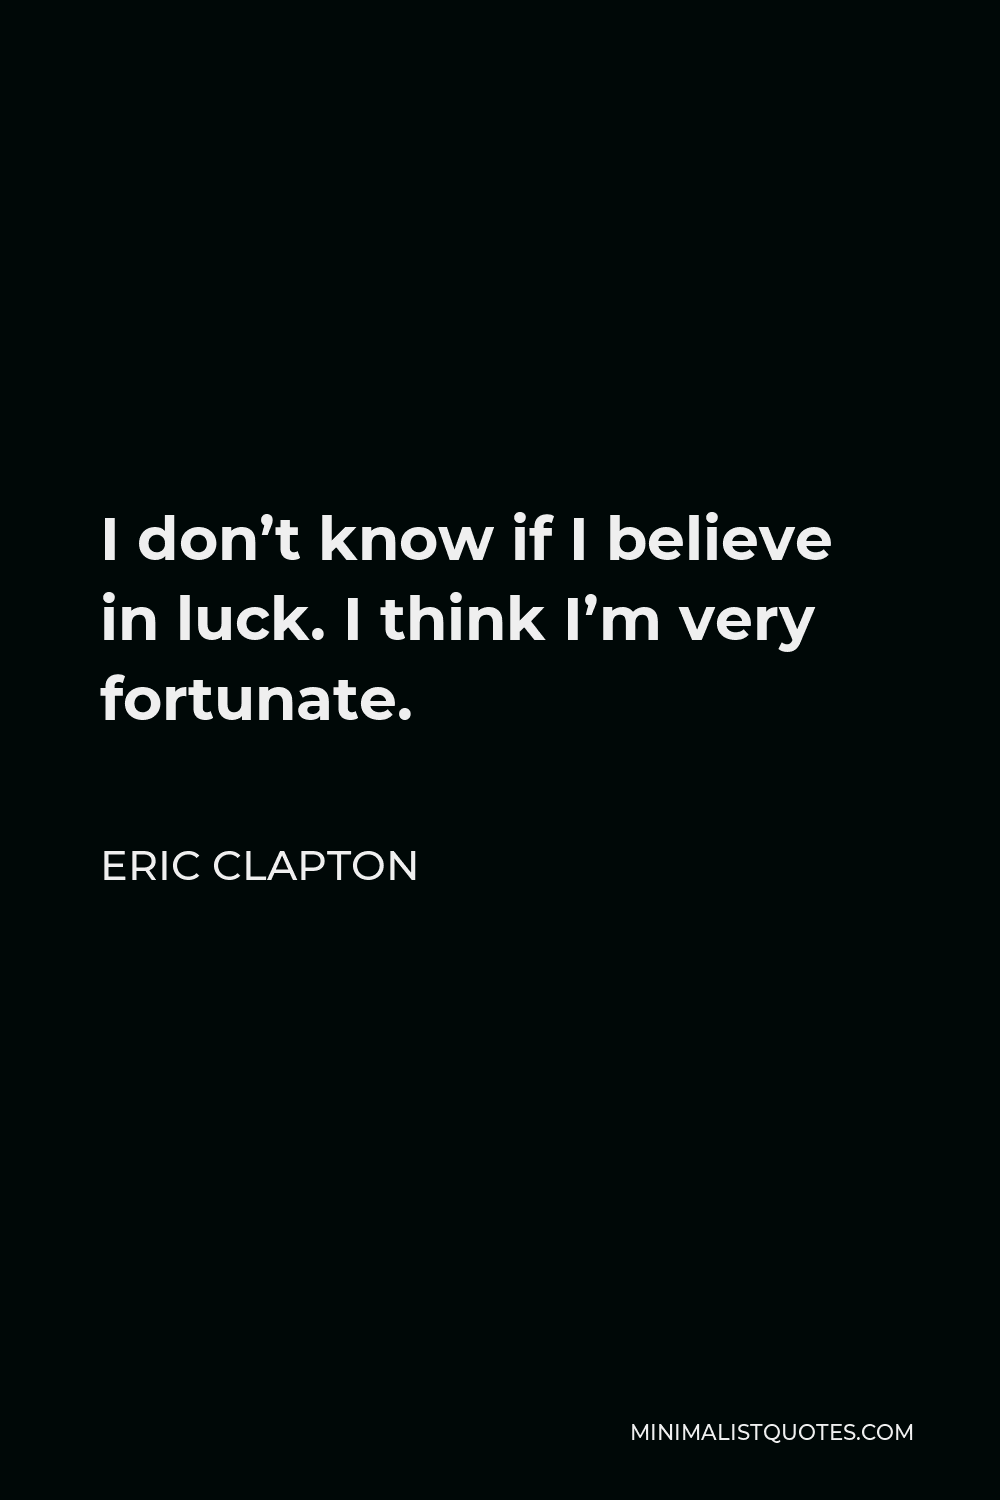 Eric Clapton Quote - I don’t know if I believe in luck. I think I’m very fortunate.